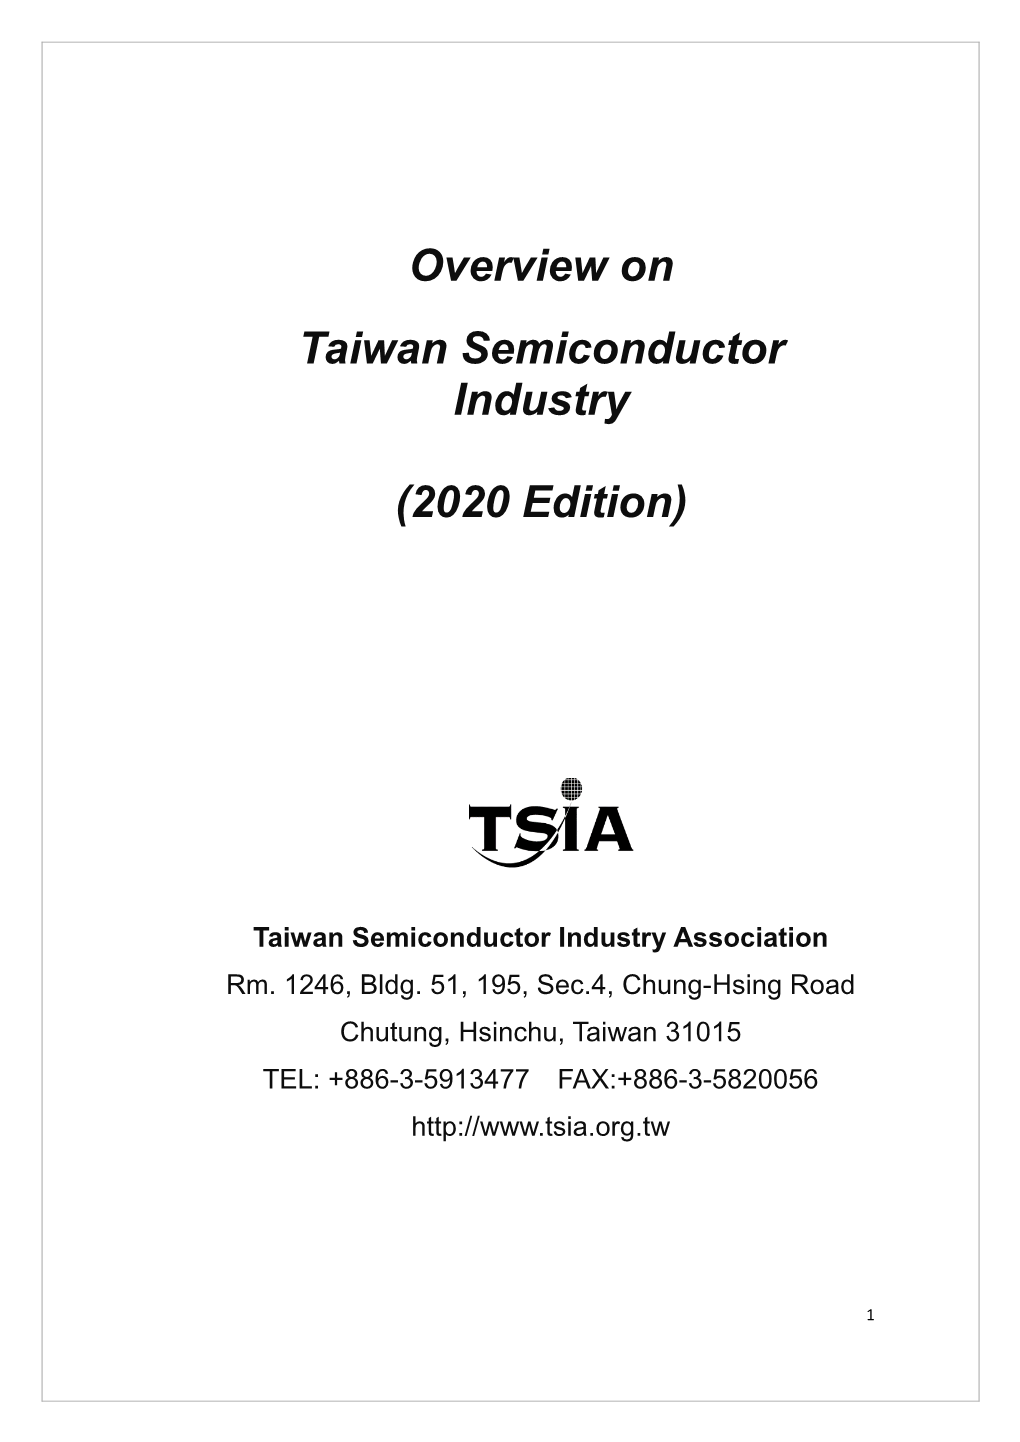 Overview on Taiwan Semiconductor Industry (2020 Edition)